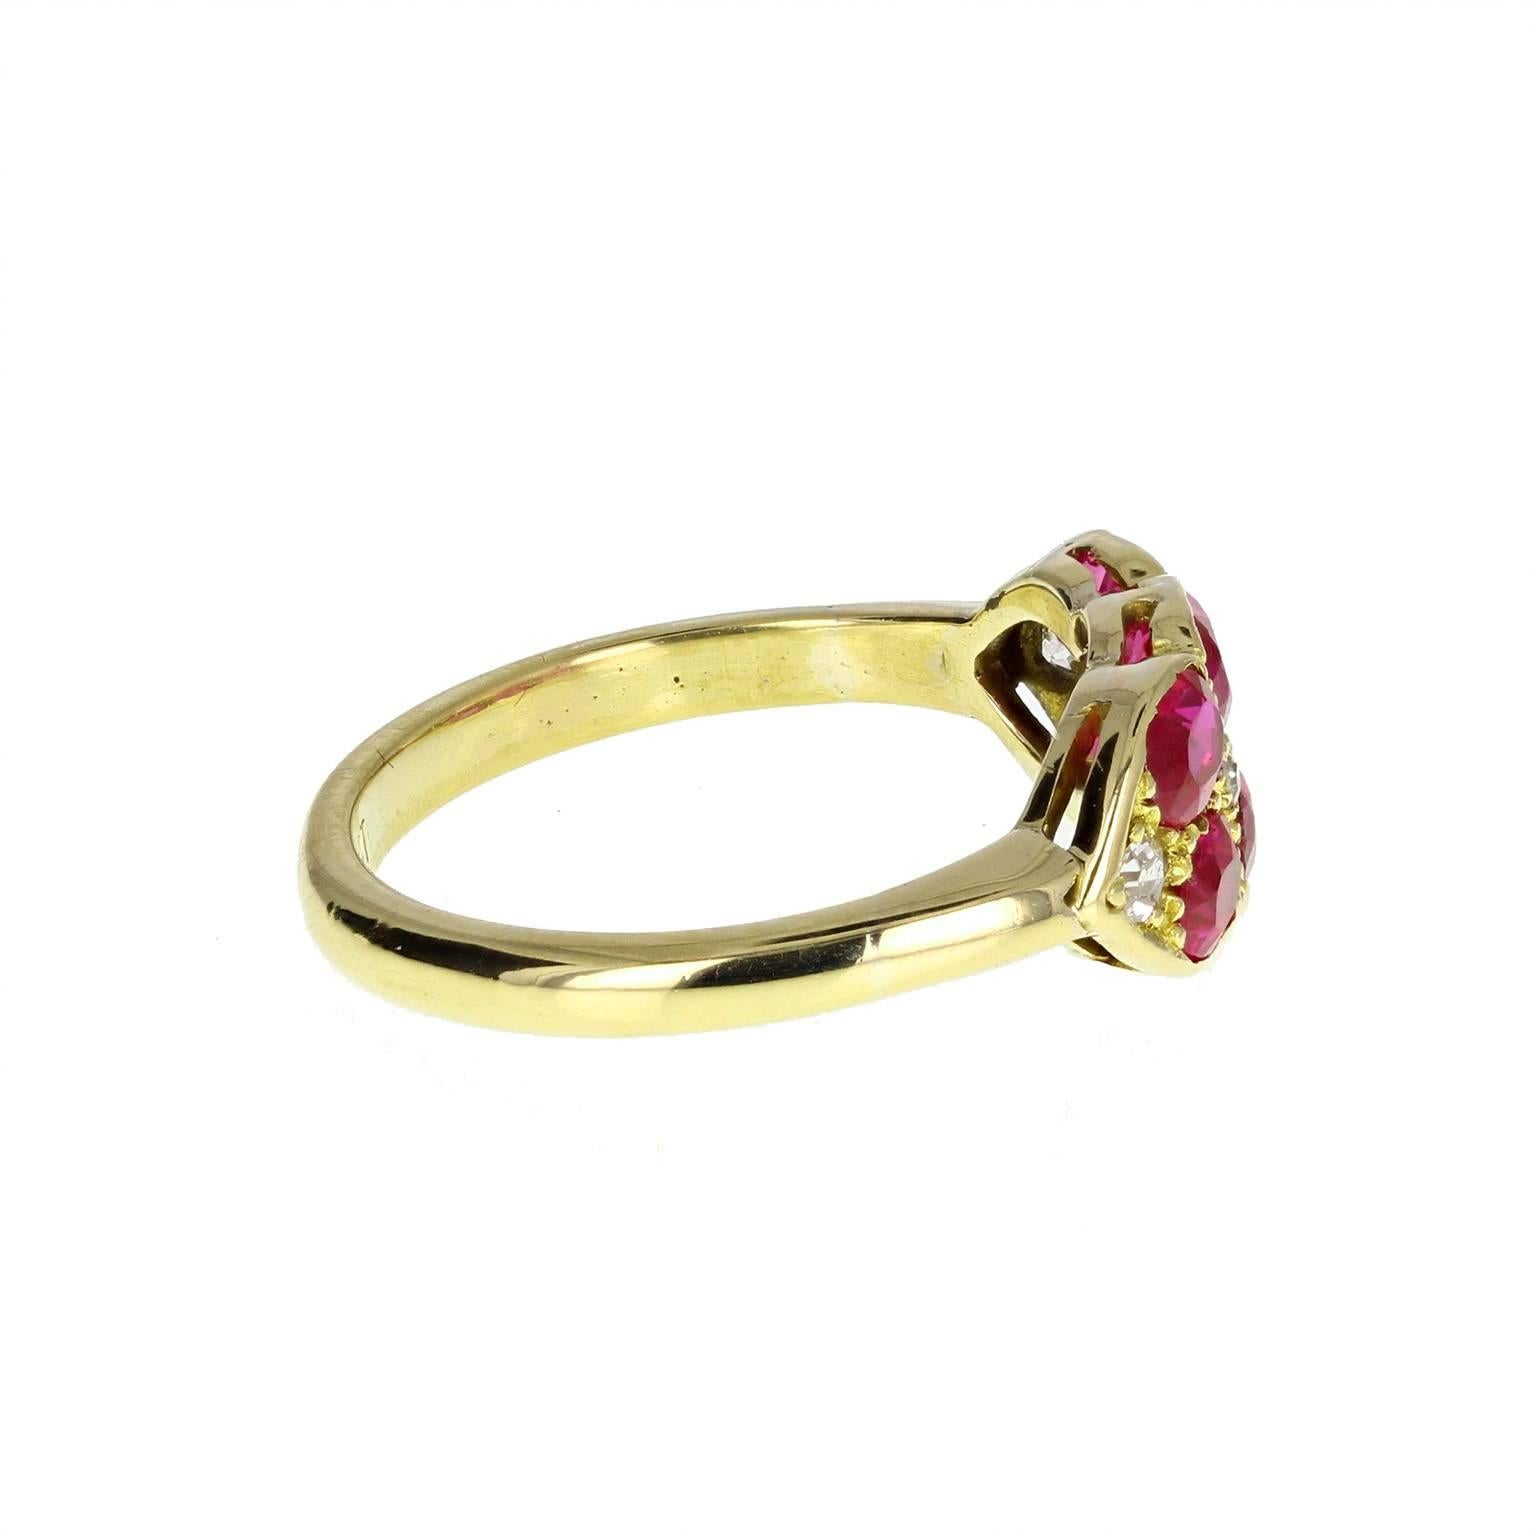 A fine quality antique victorian cluster ring. Six cushion cut rubies of well-matched colour and shape mounted in an 18 carat gold setting in two rows of three. Accented with four old-cut melee diamonds. Polished 18 carat gold shank. Stamped '18ct'